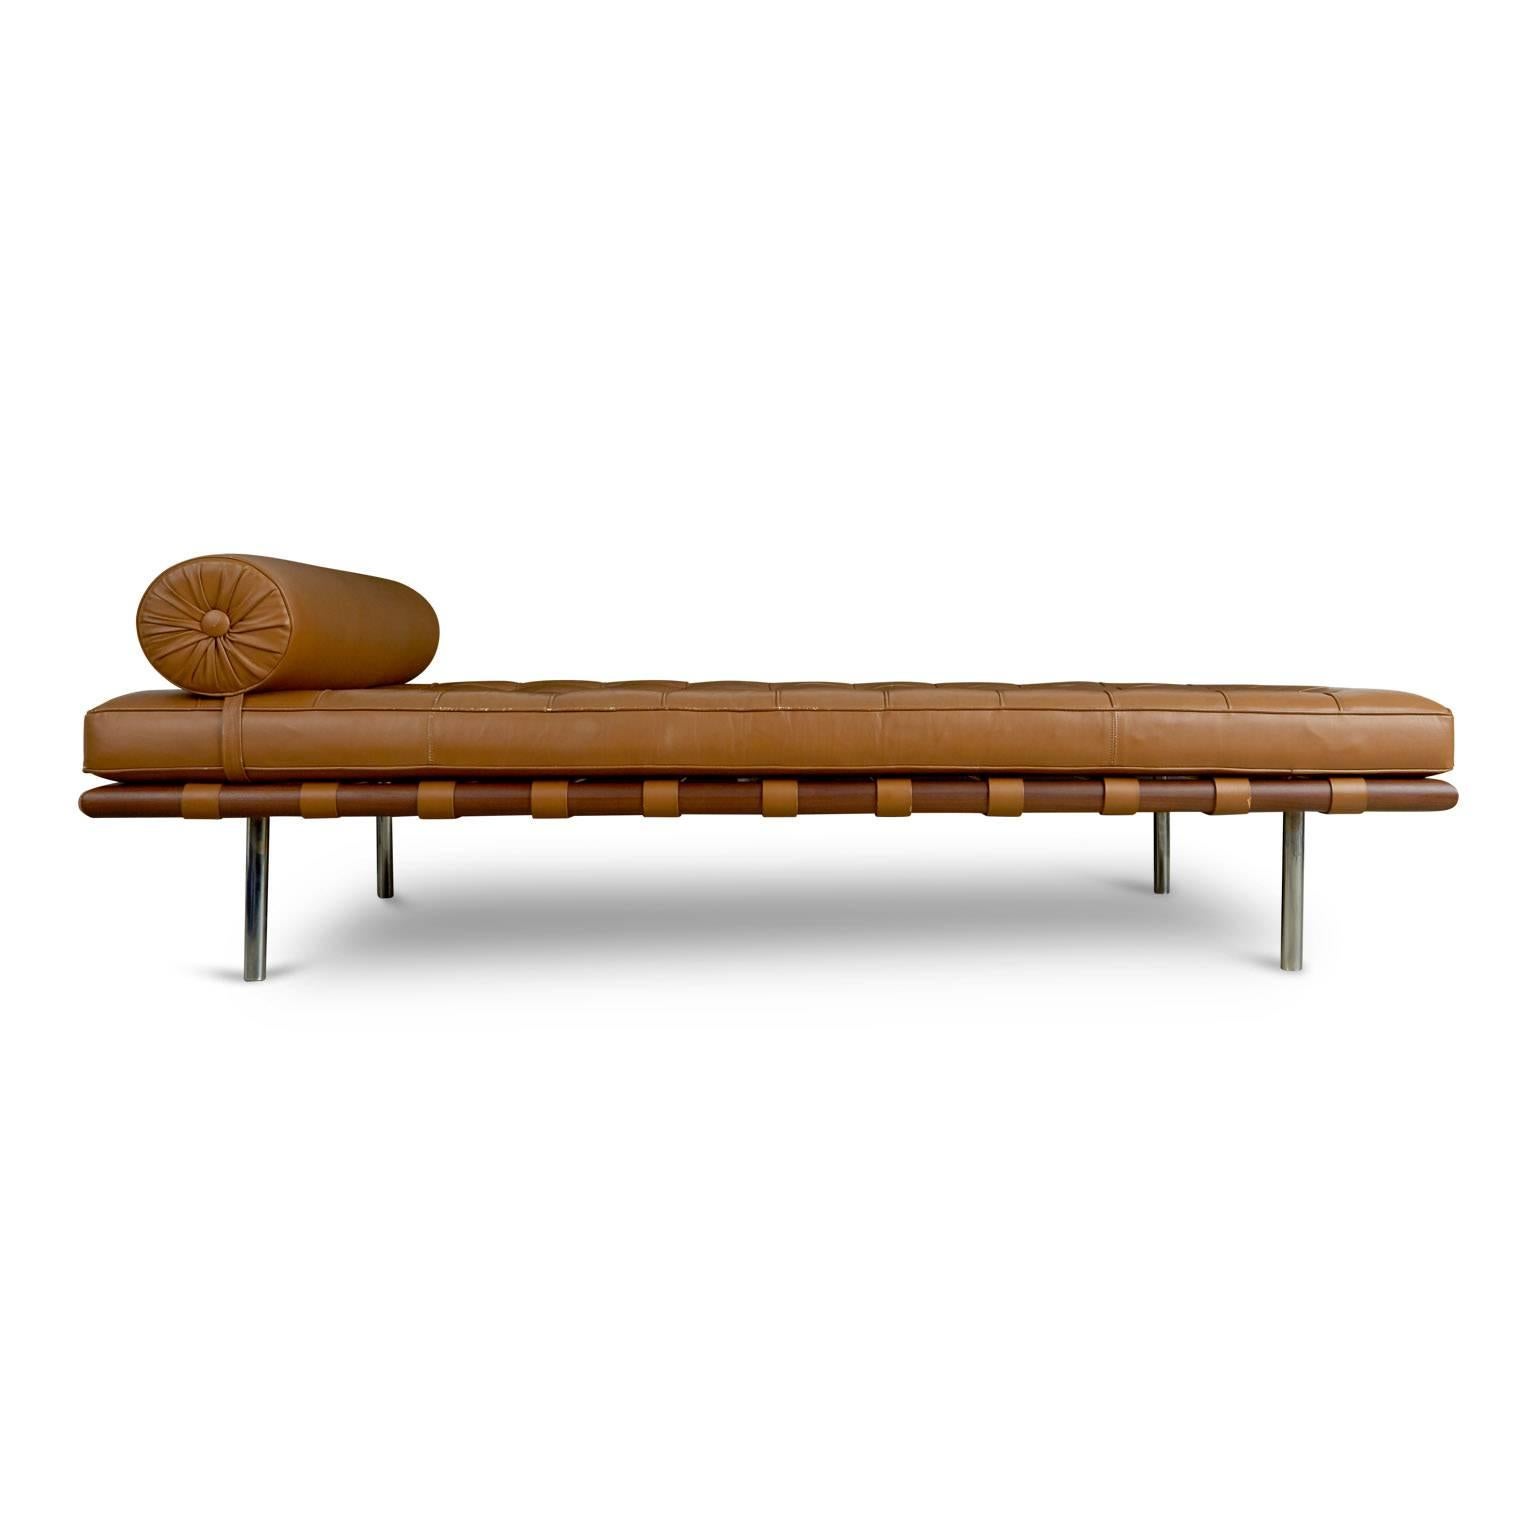 Considered to be the epitome of modern design, Mies van der Rohe and Lilly Reich originally designed the Barcelona chair in 1929 to serve as seating for the king and queen of Spain in the German Pavilion. This was Germany's entry for the